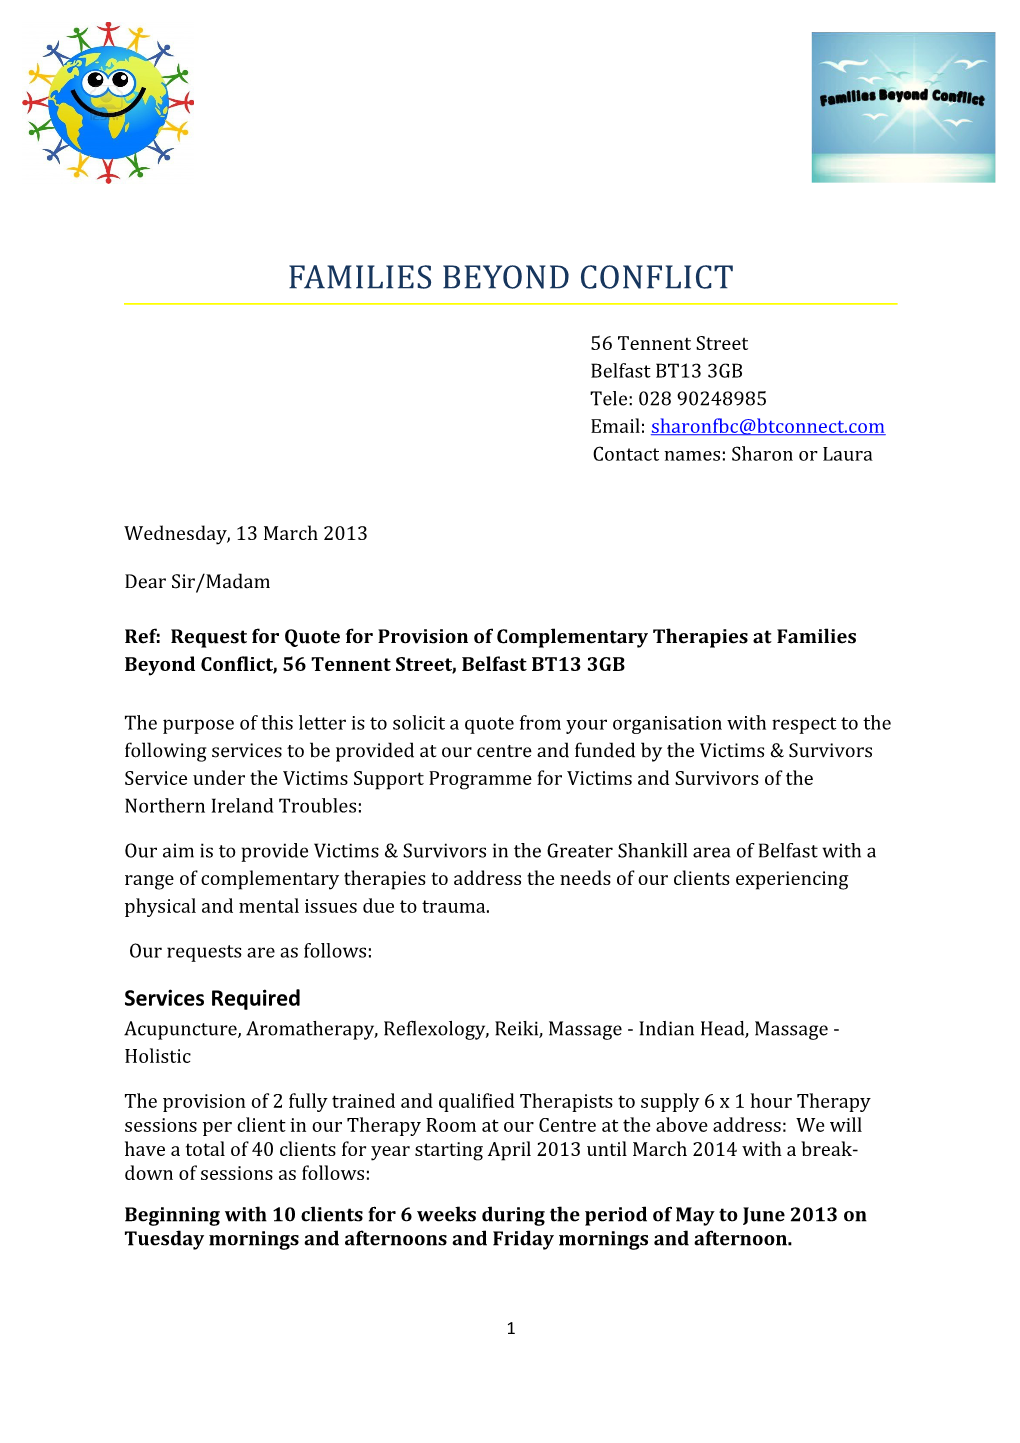 Families Beyond Conflict